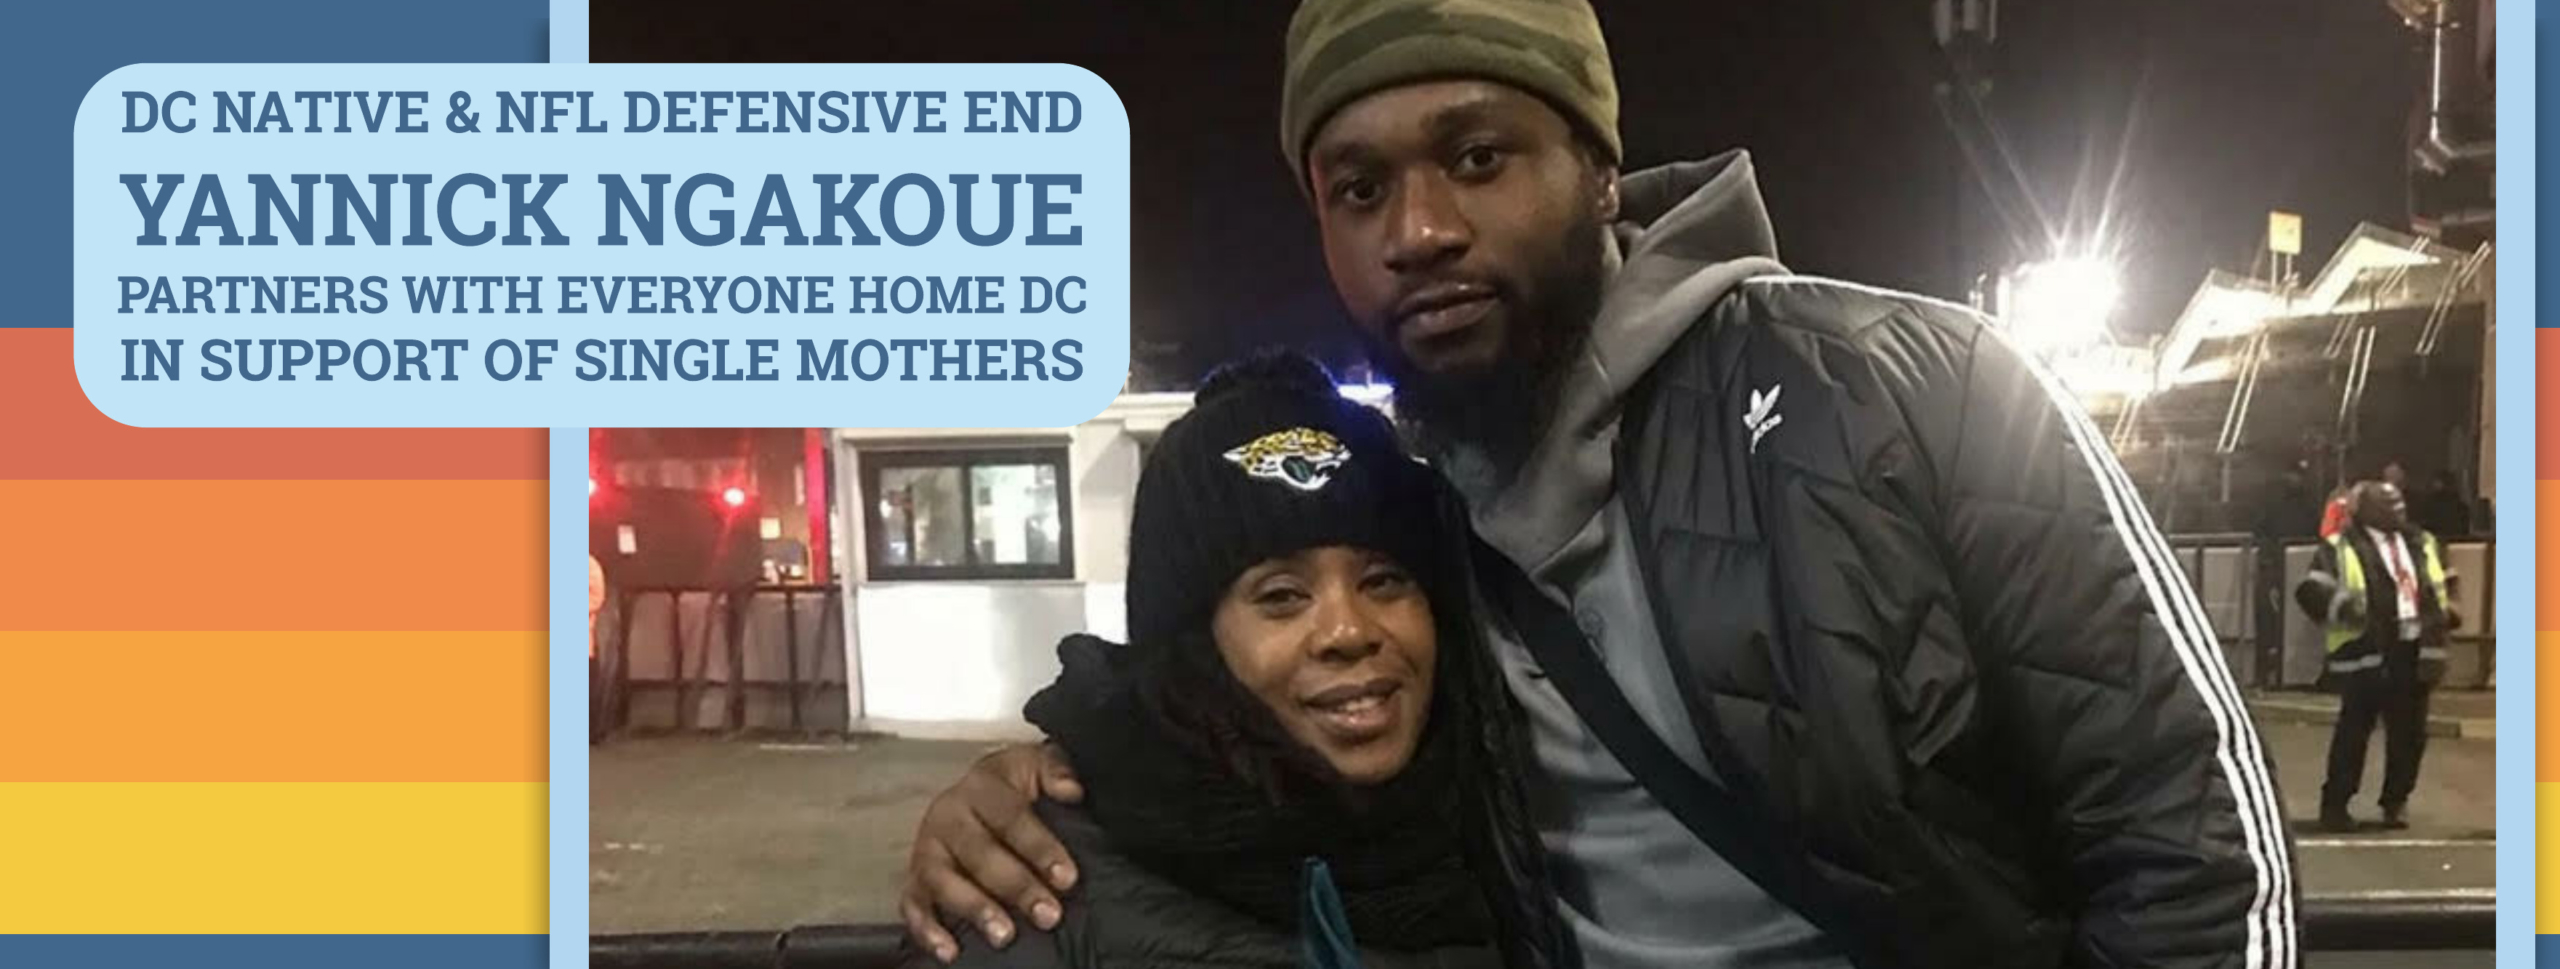 New Partnership with NFL Defensive End Yannick Ngakoue – Everyone Home DC